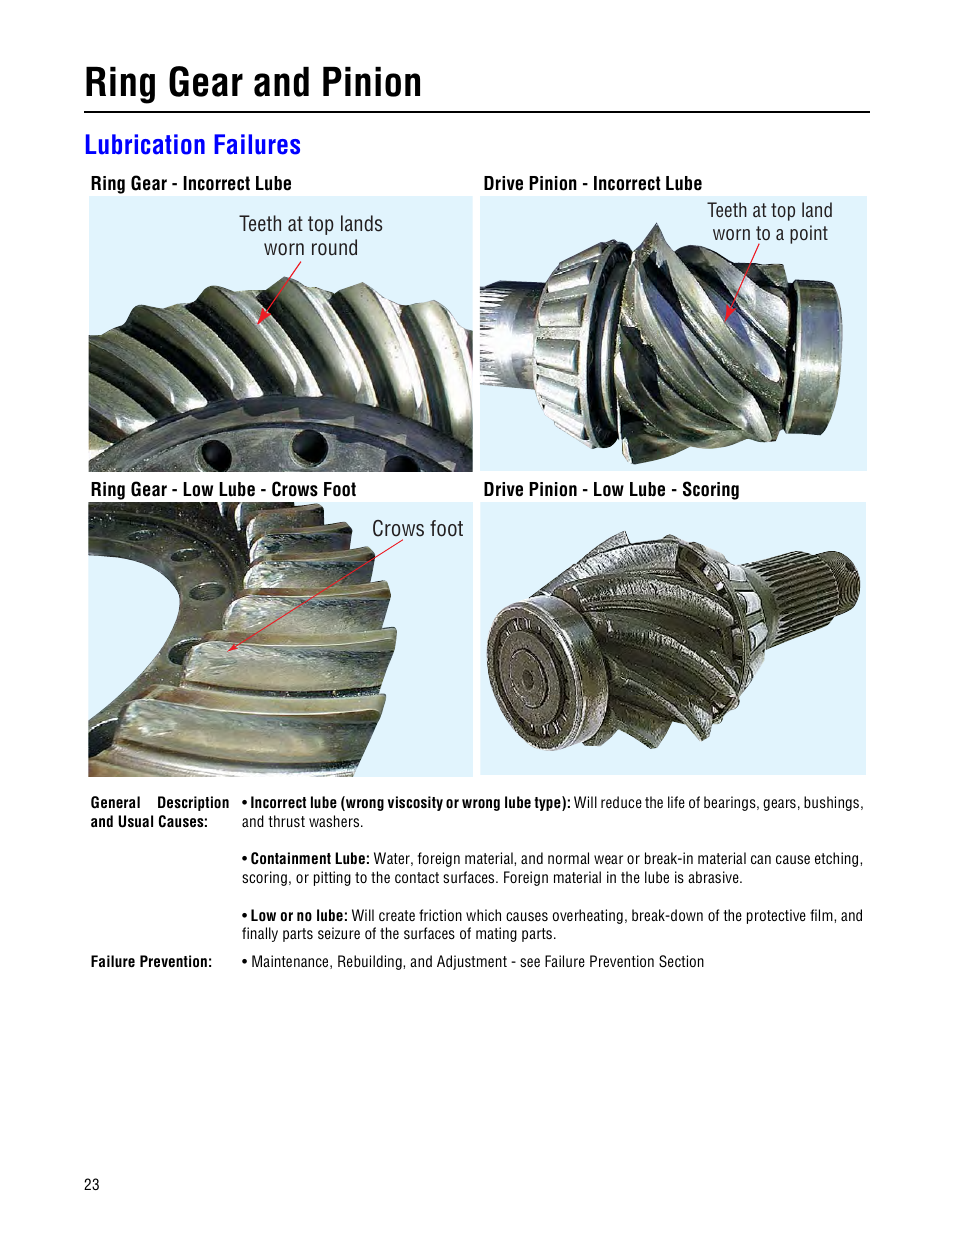 Lubrication failures, Ring gear and pinion | Spicer Drive Axles Failure